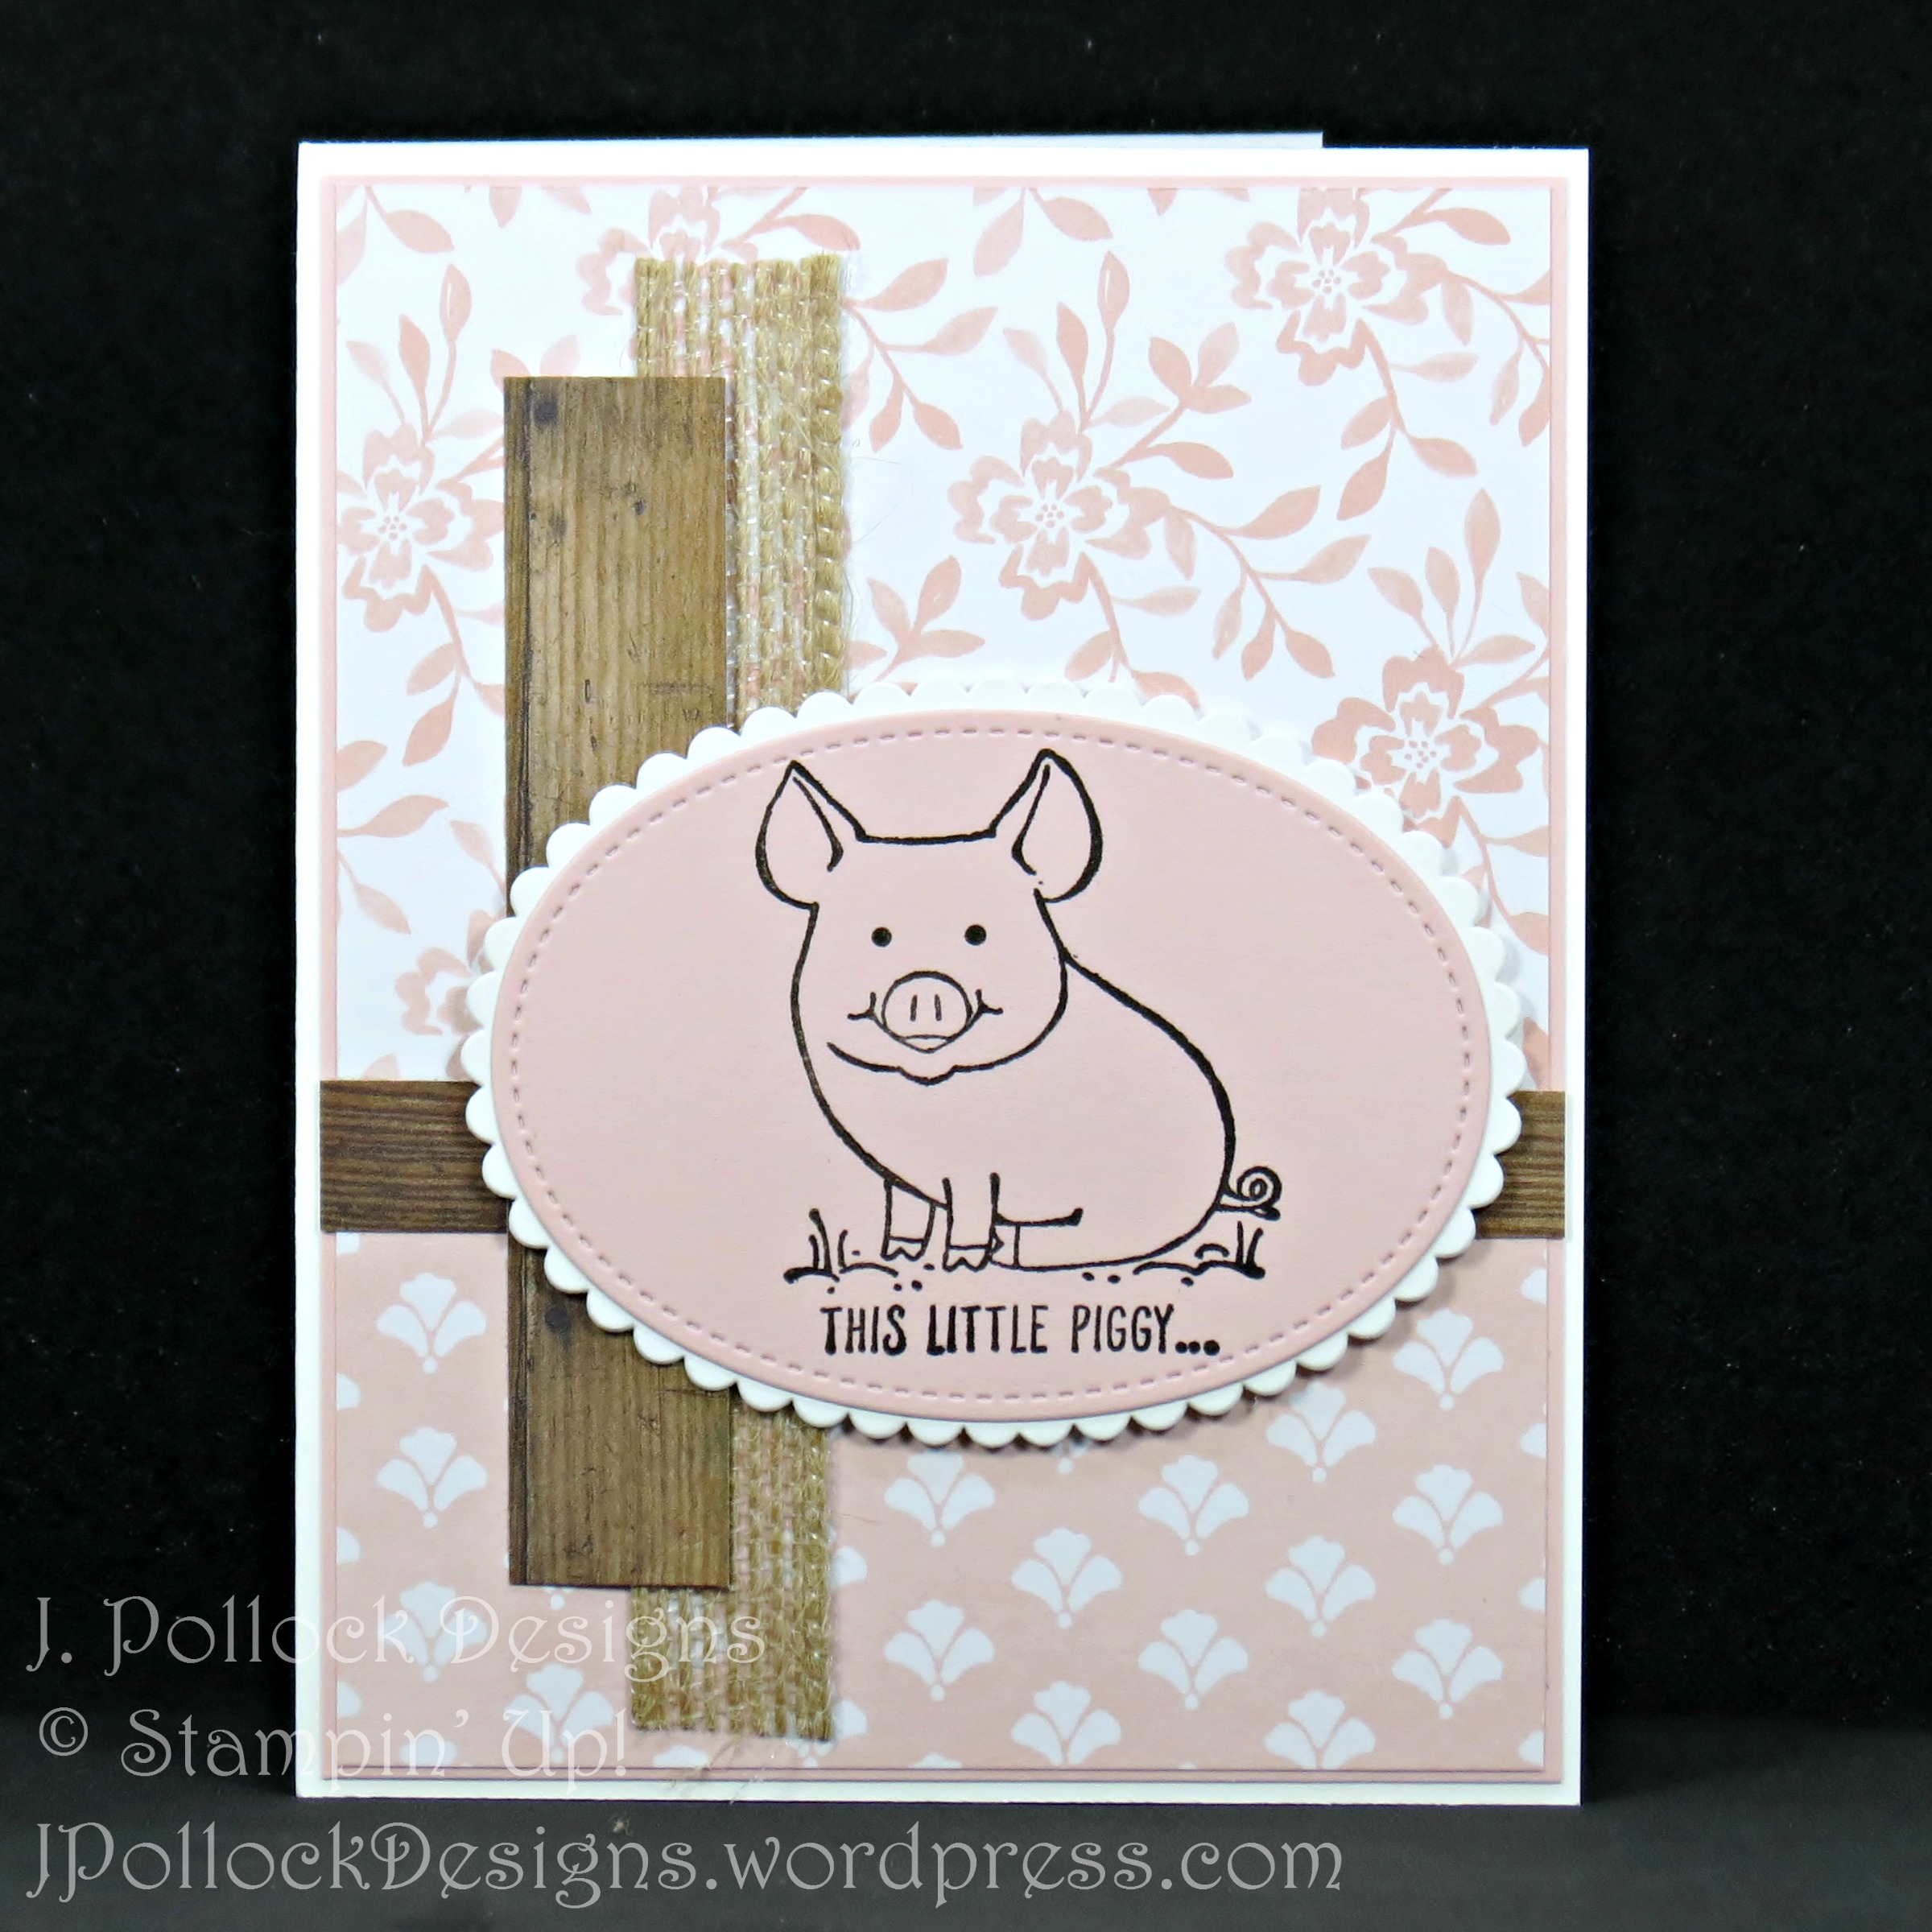 J. Pollock Designs - Stampin' Up! - This Little Piggy